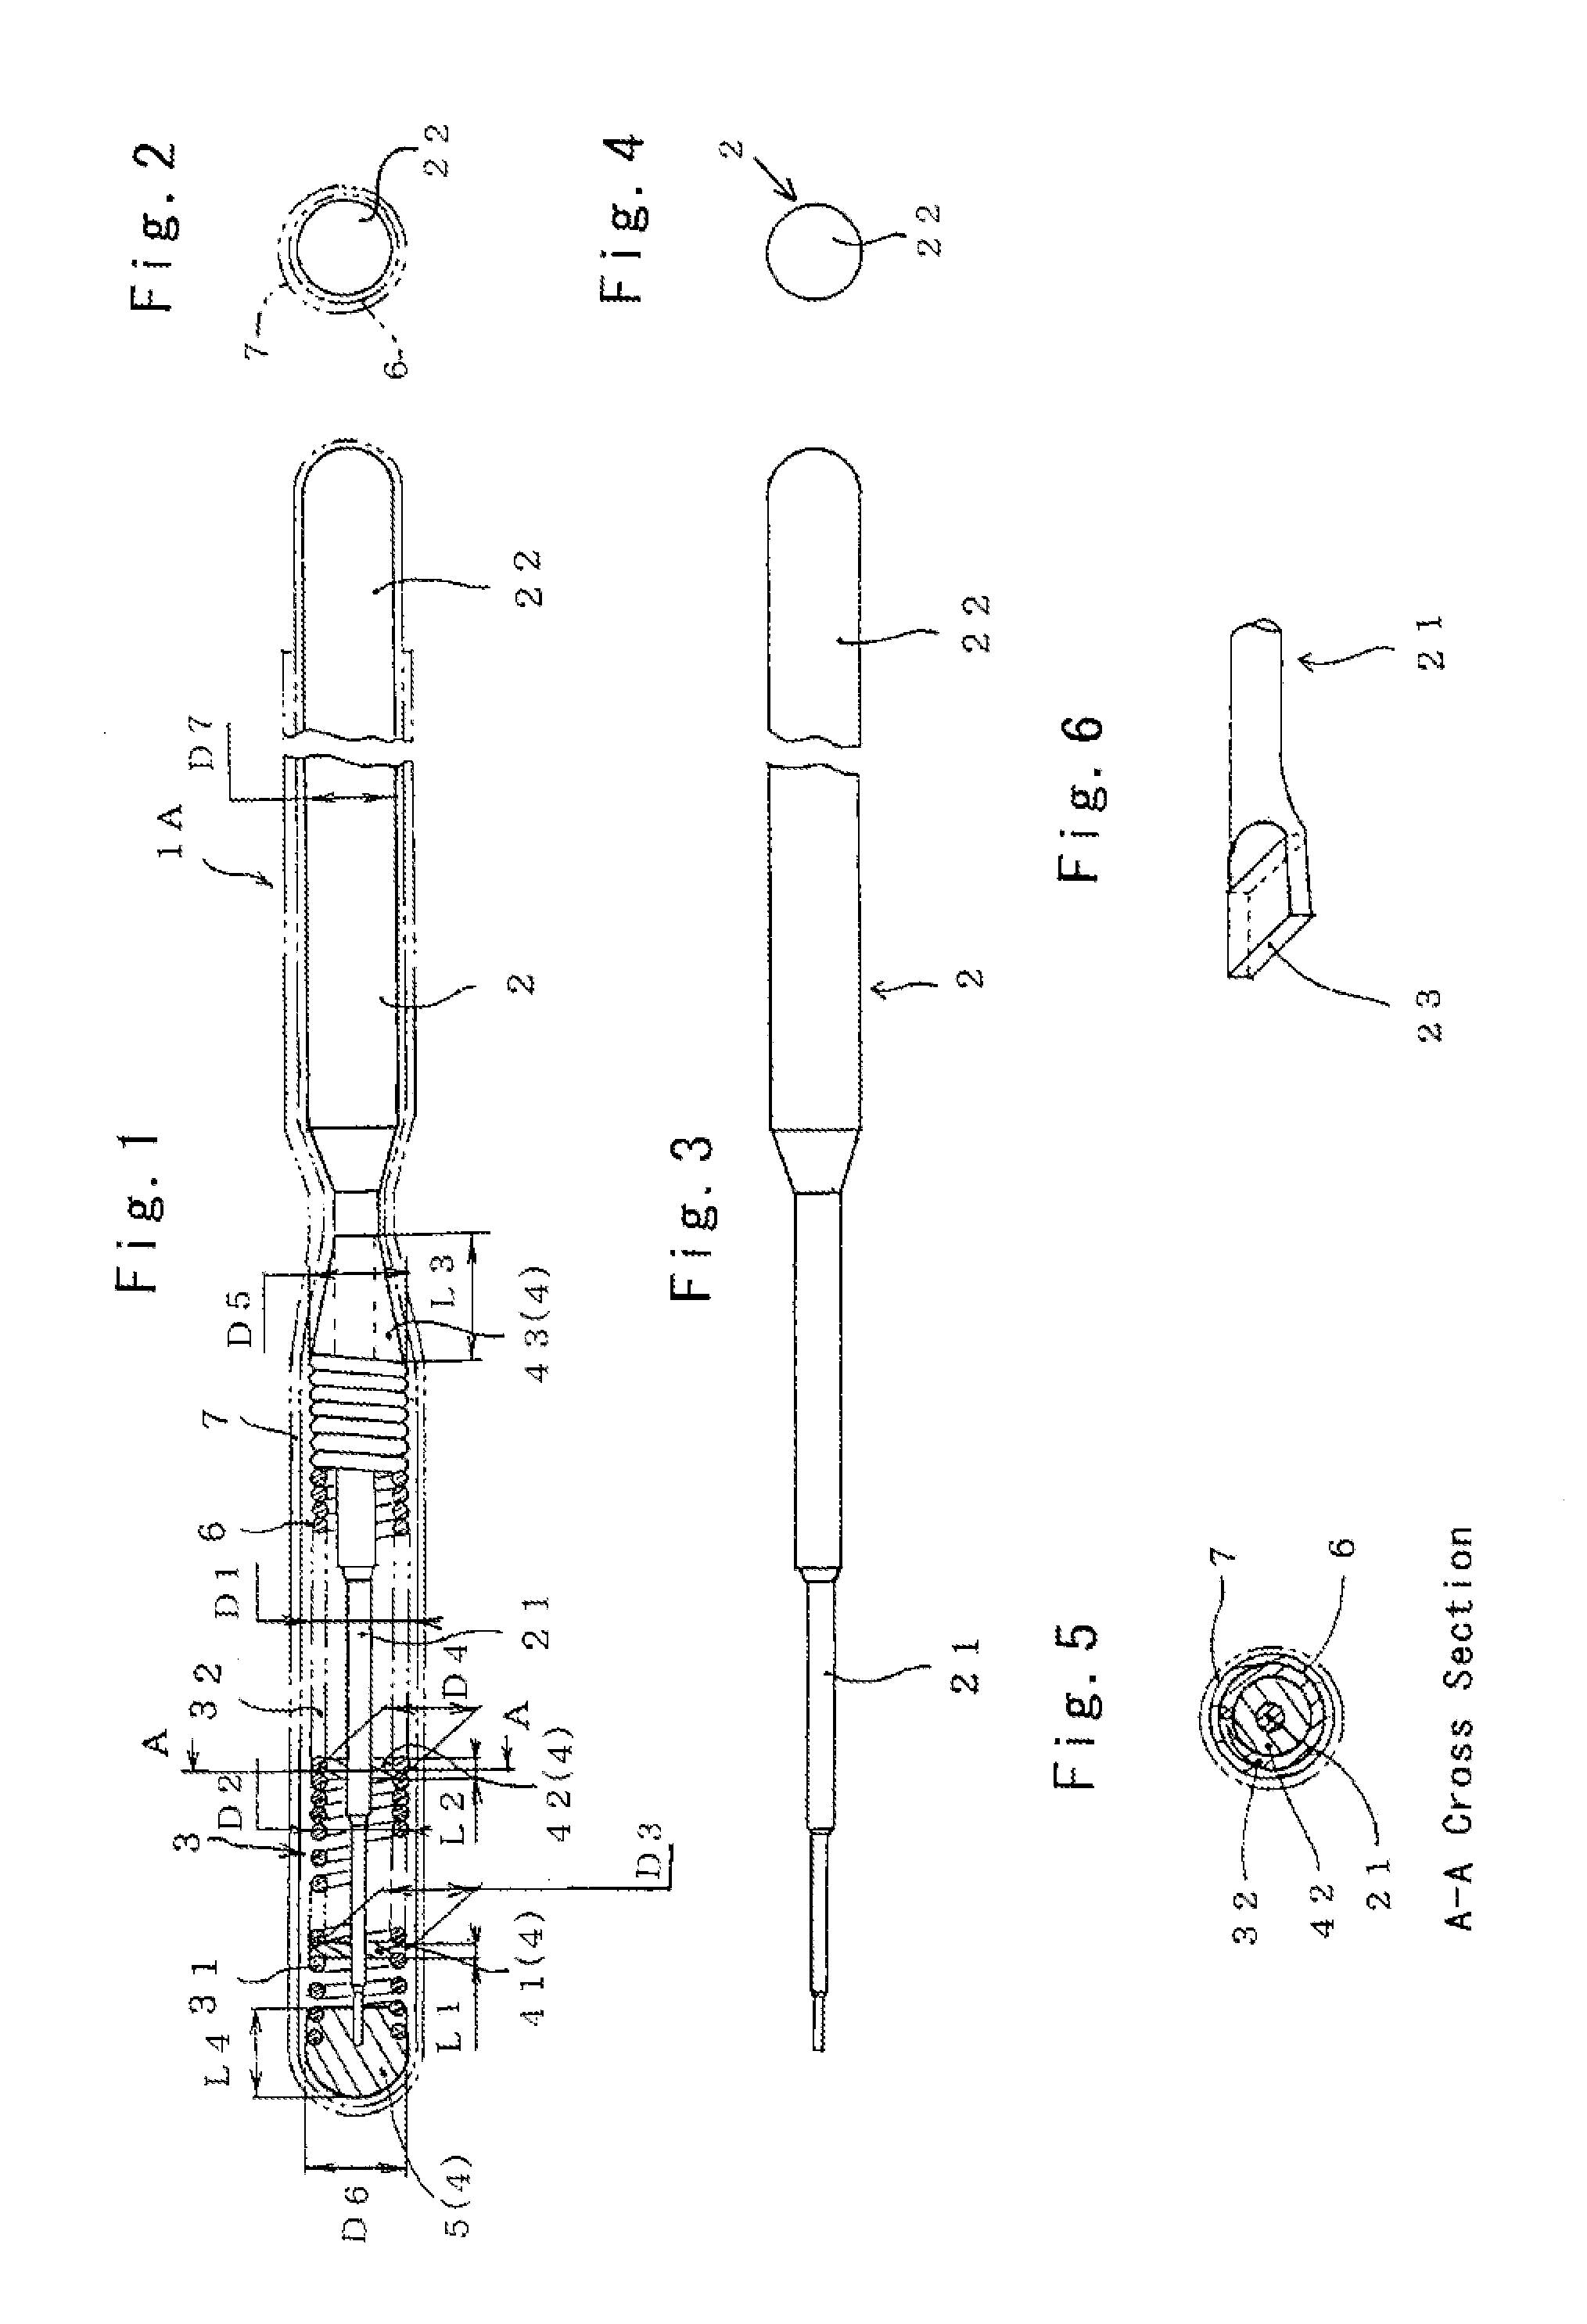  medical guide wire, an assembly of microcatheter and guiding catheter combined with the medical guide wire, and an assembly of ballooncatheter and guiding catheter combined with the medical guide wire